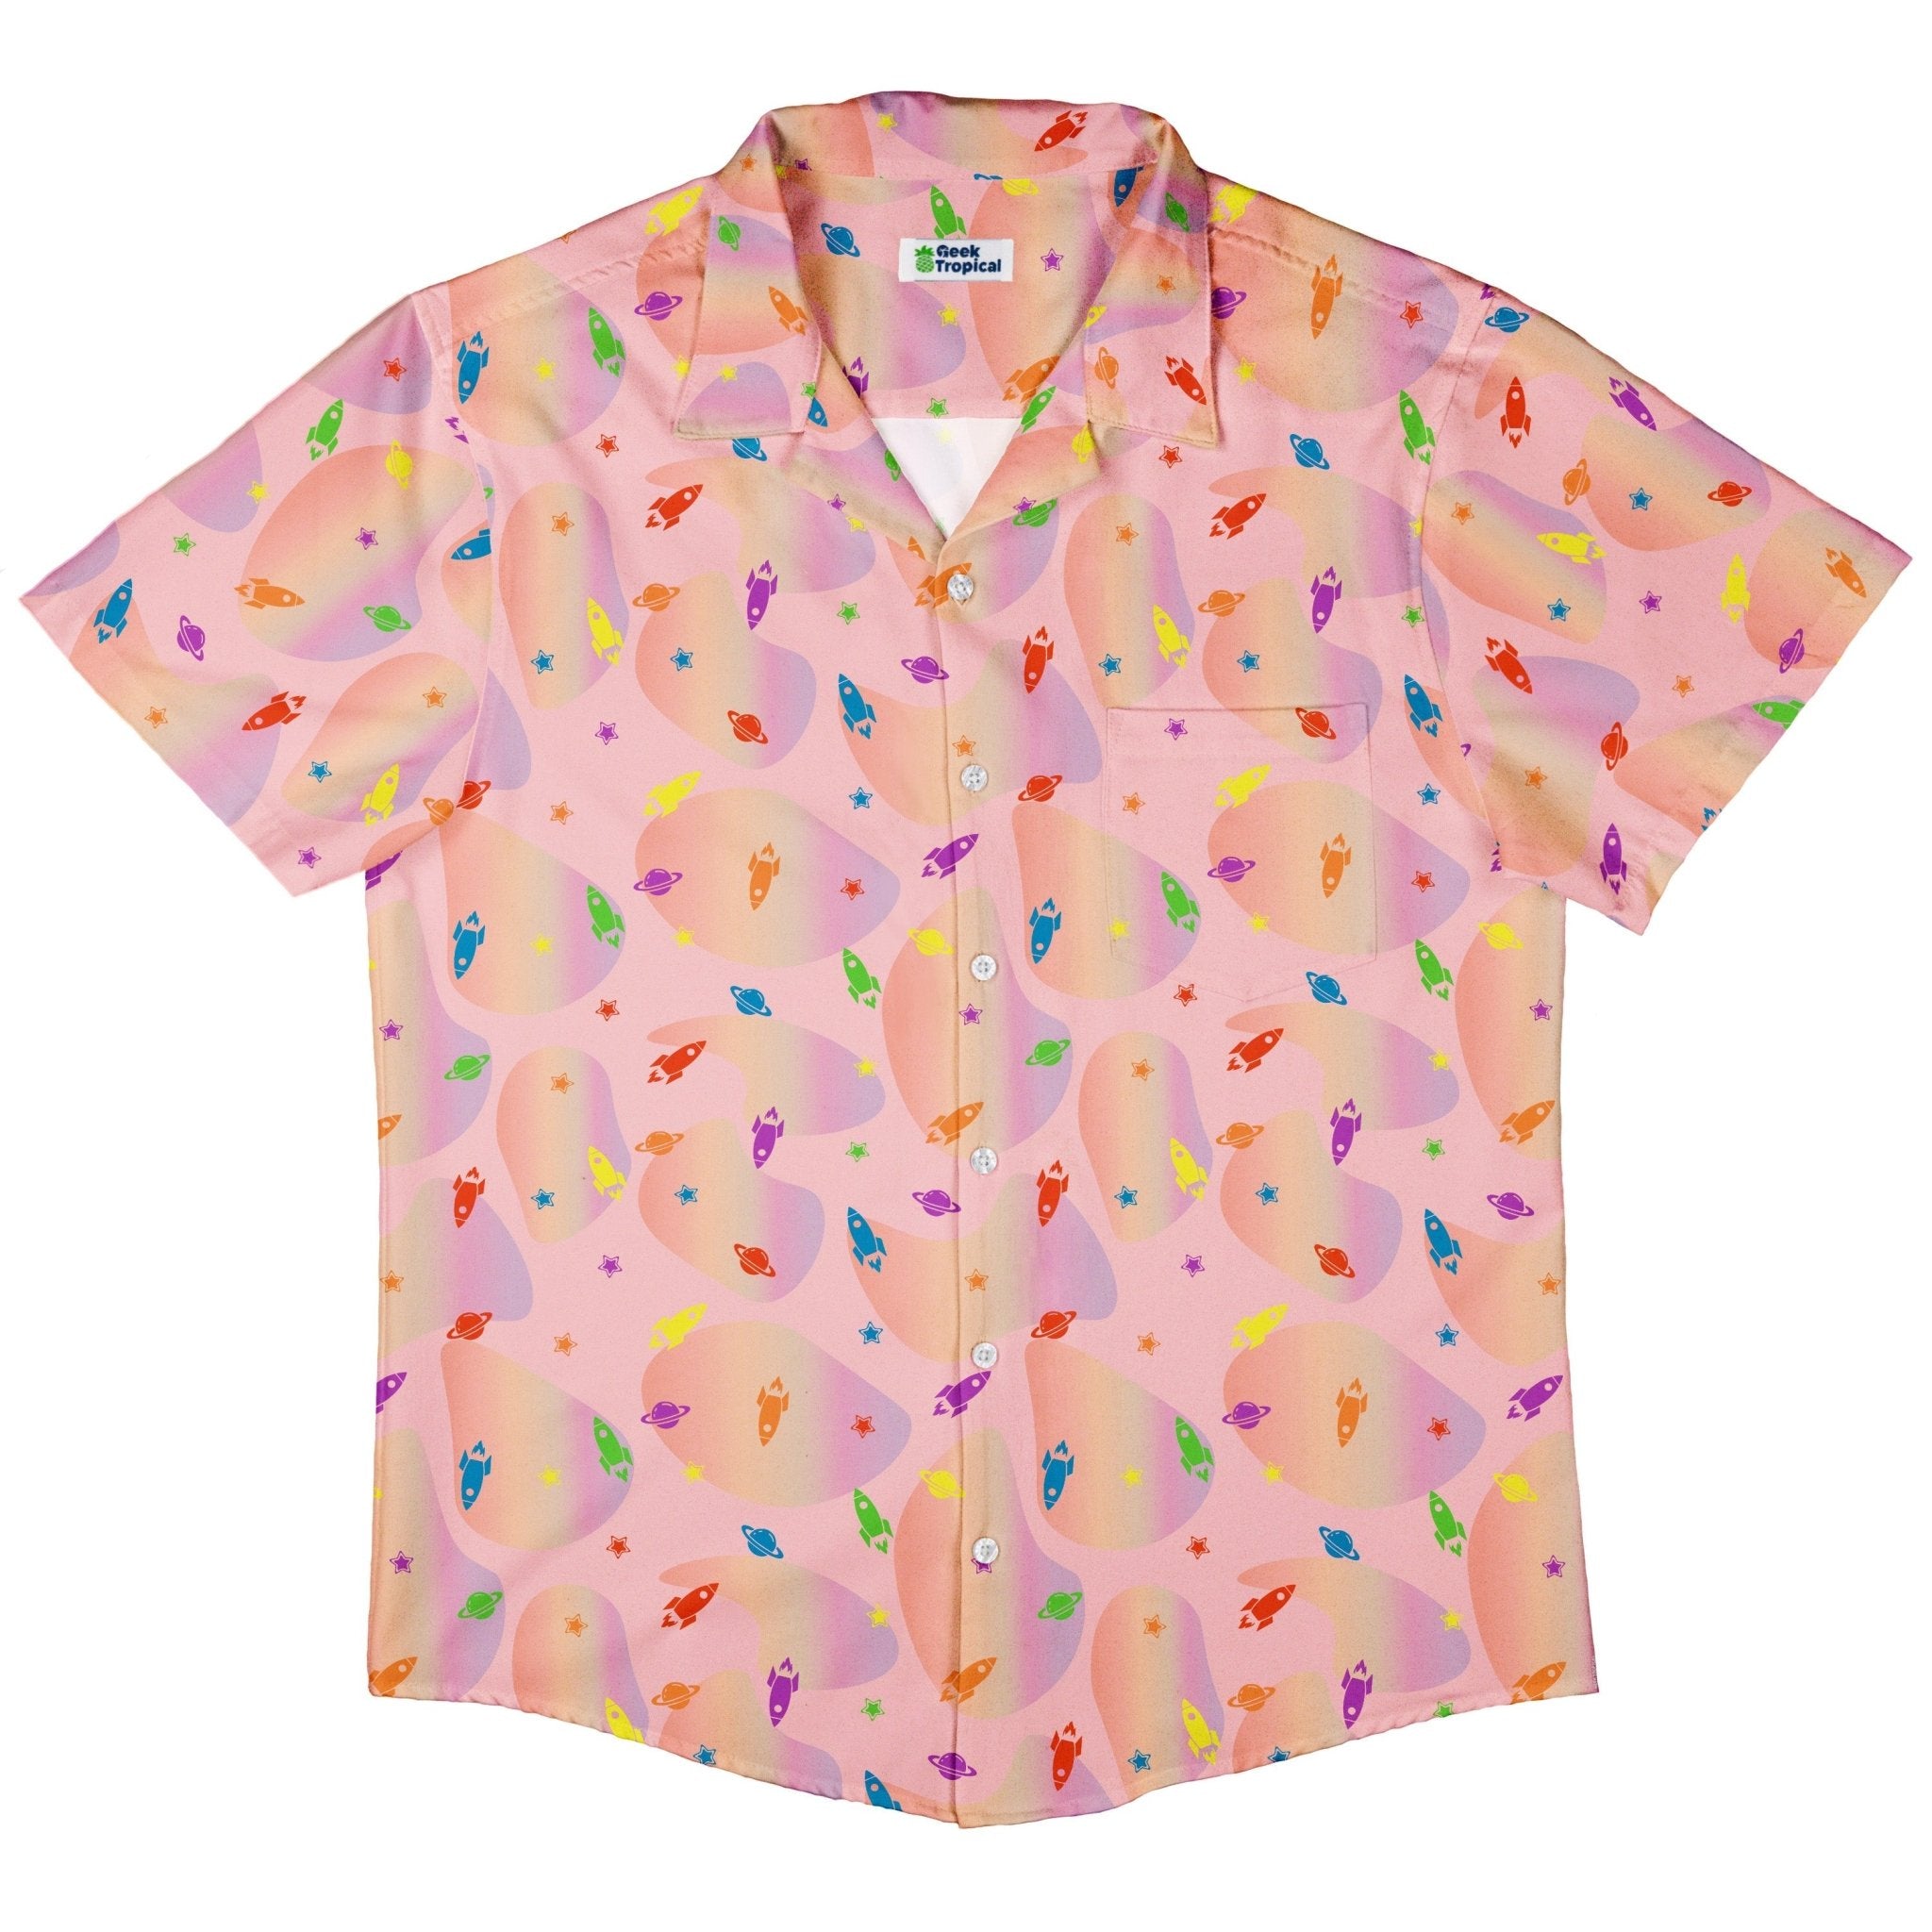 Space Pride Pink Button Up Shirt - adult sizing - outer space & astronaut print - Pride Patterns